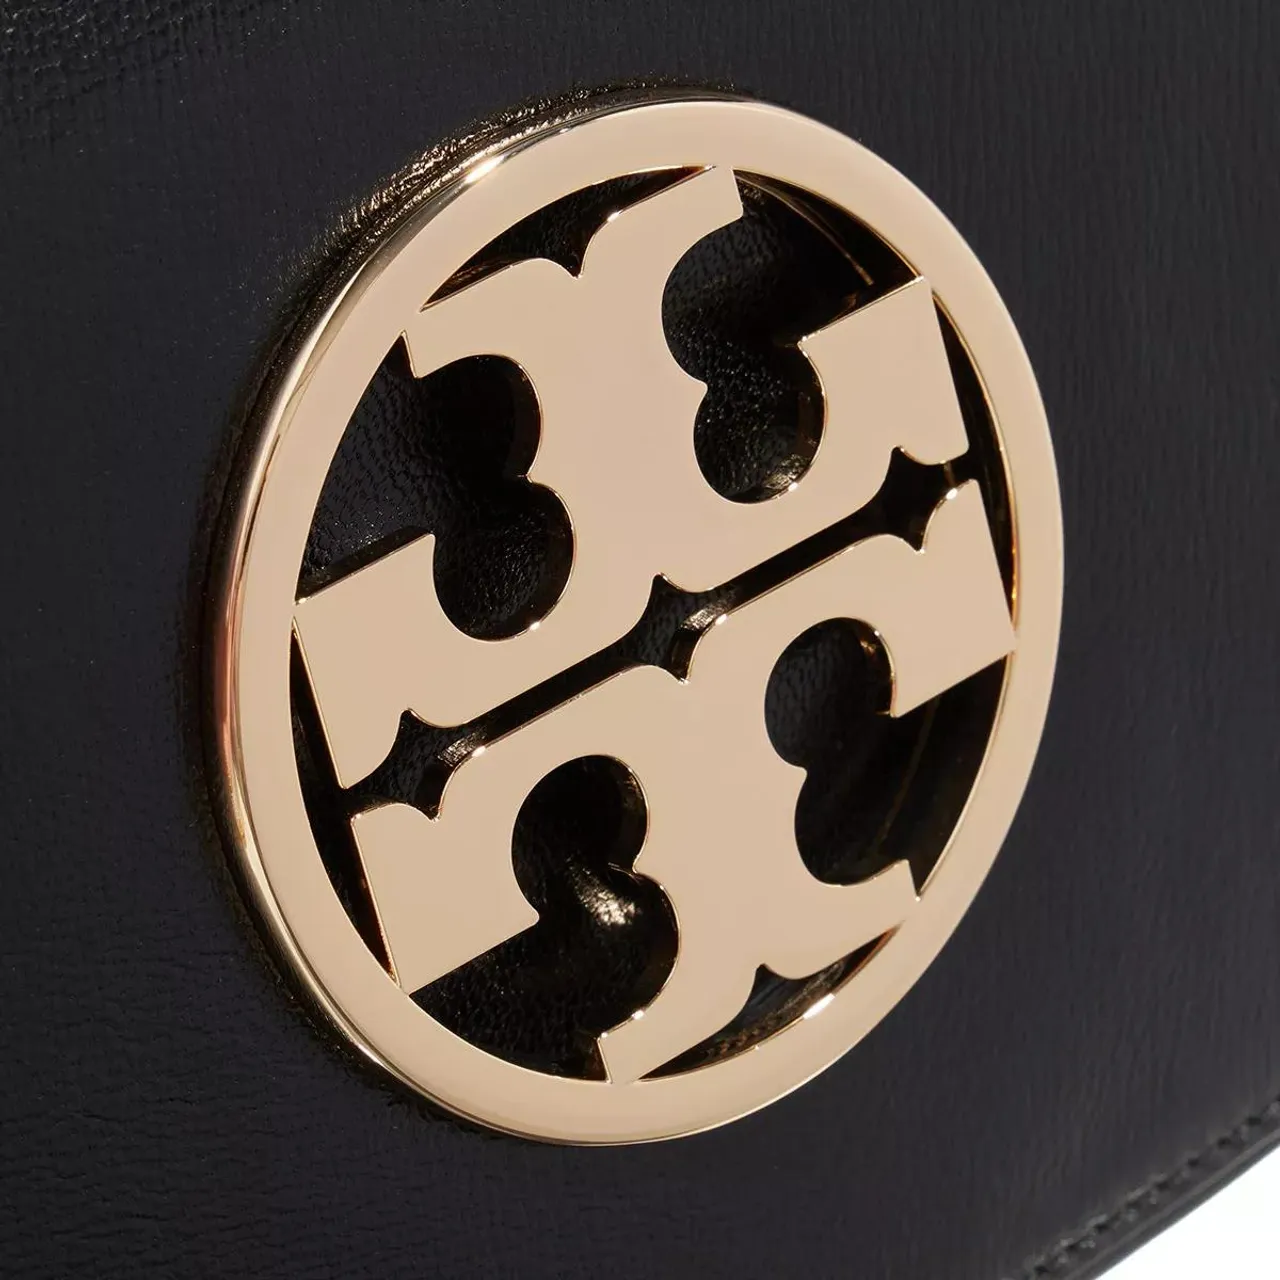 Tory Burch Clutches - Reva Clutch - black - Clutches for ladies